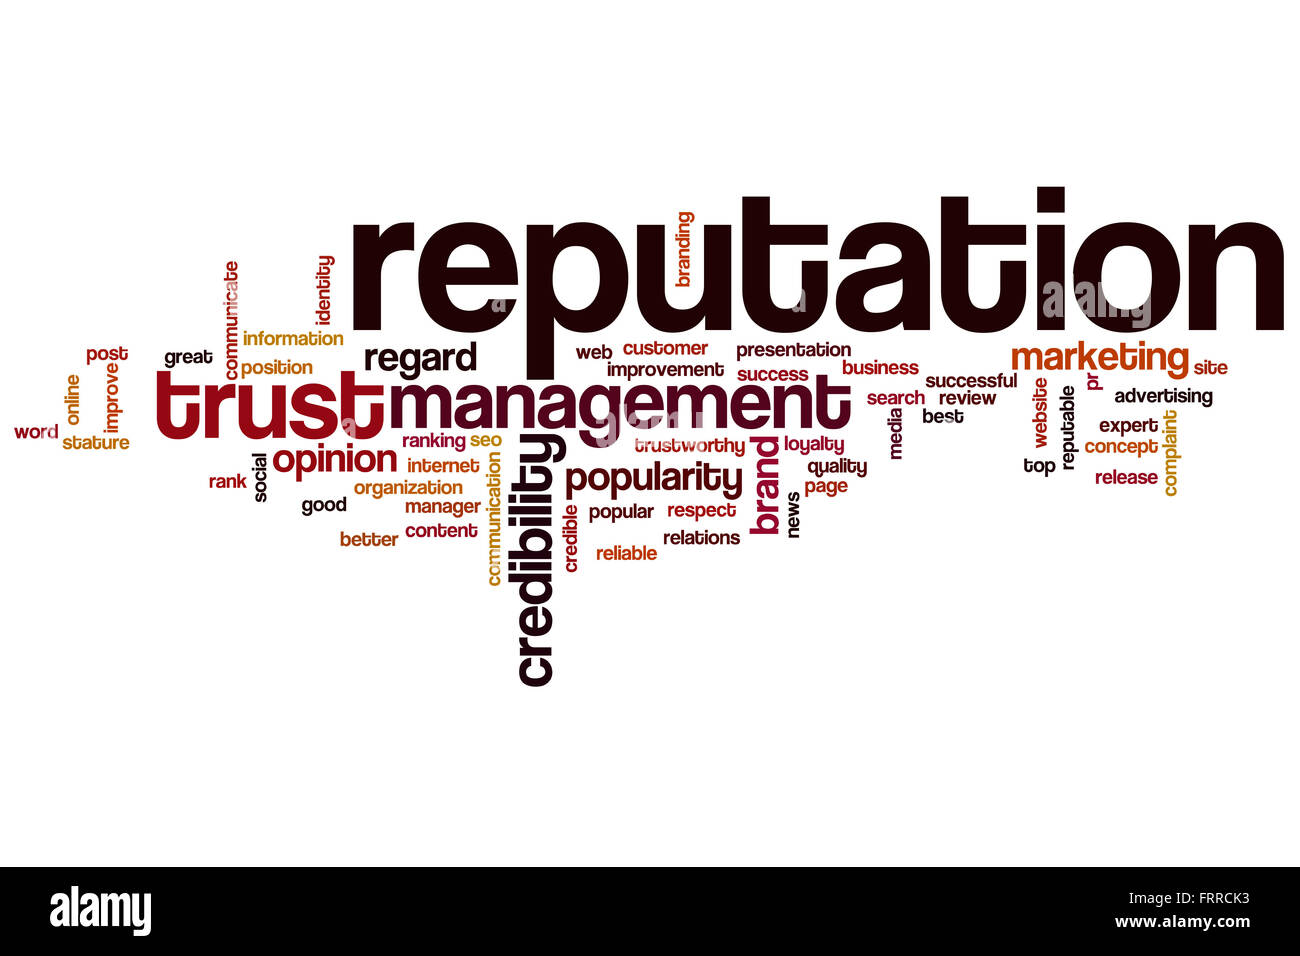 Reputation word cloud concept with crediblity brand related tags Stock Photo